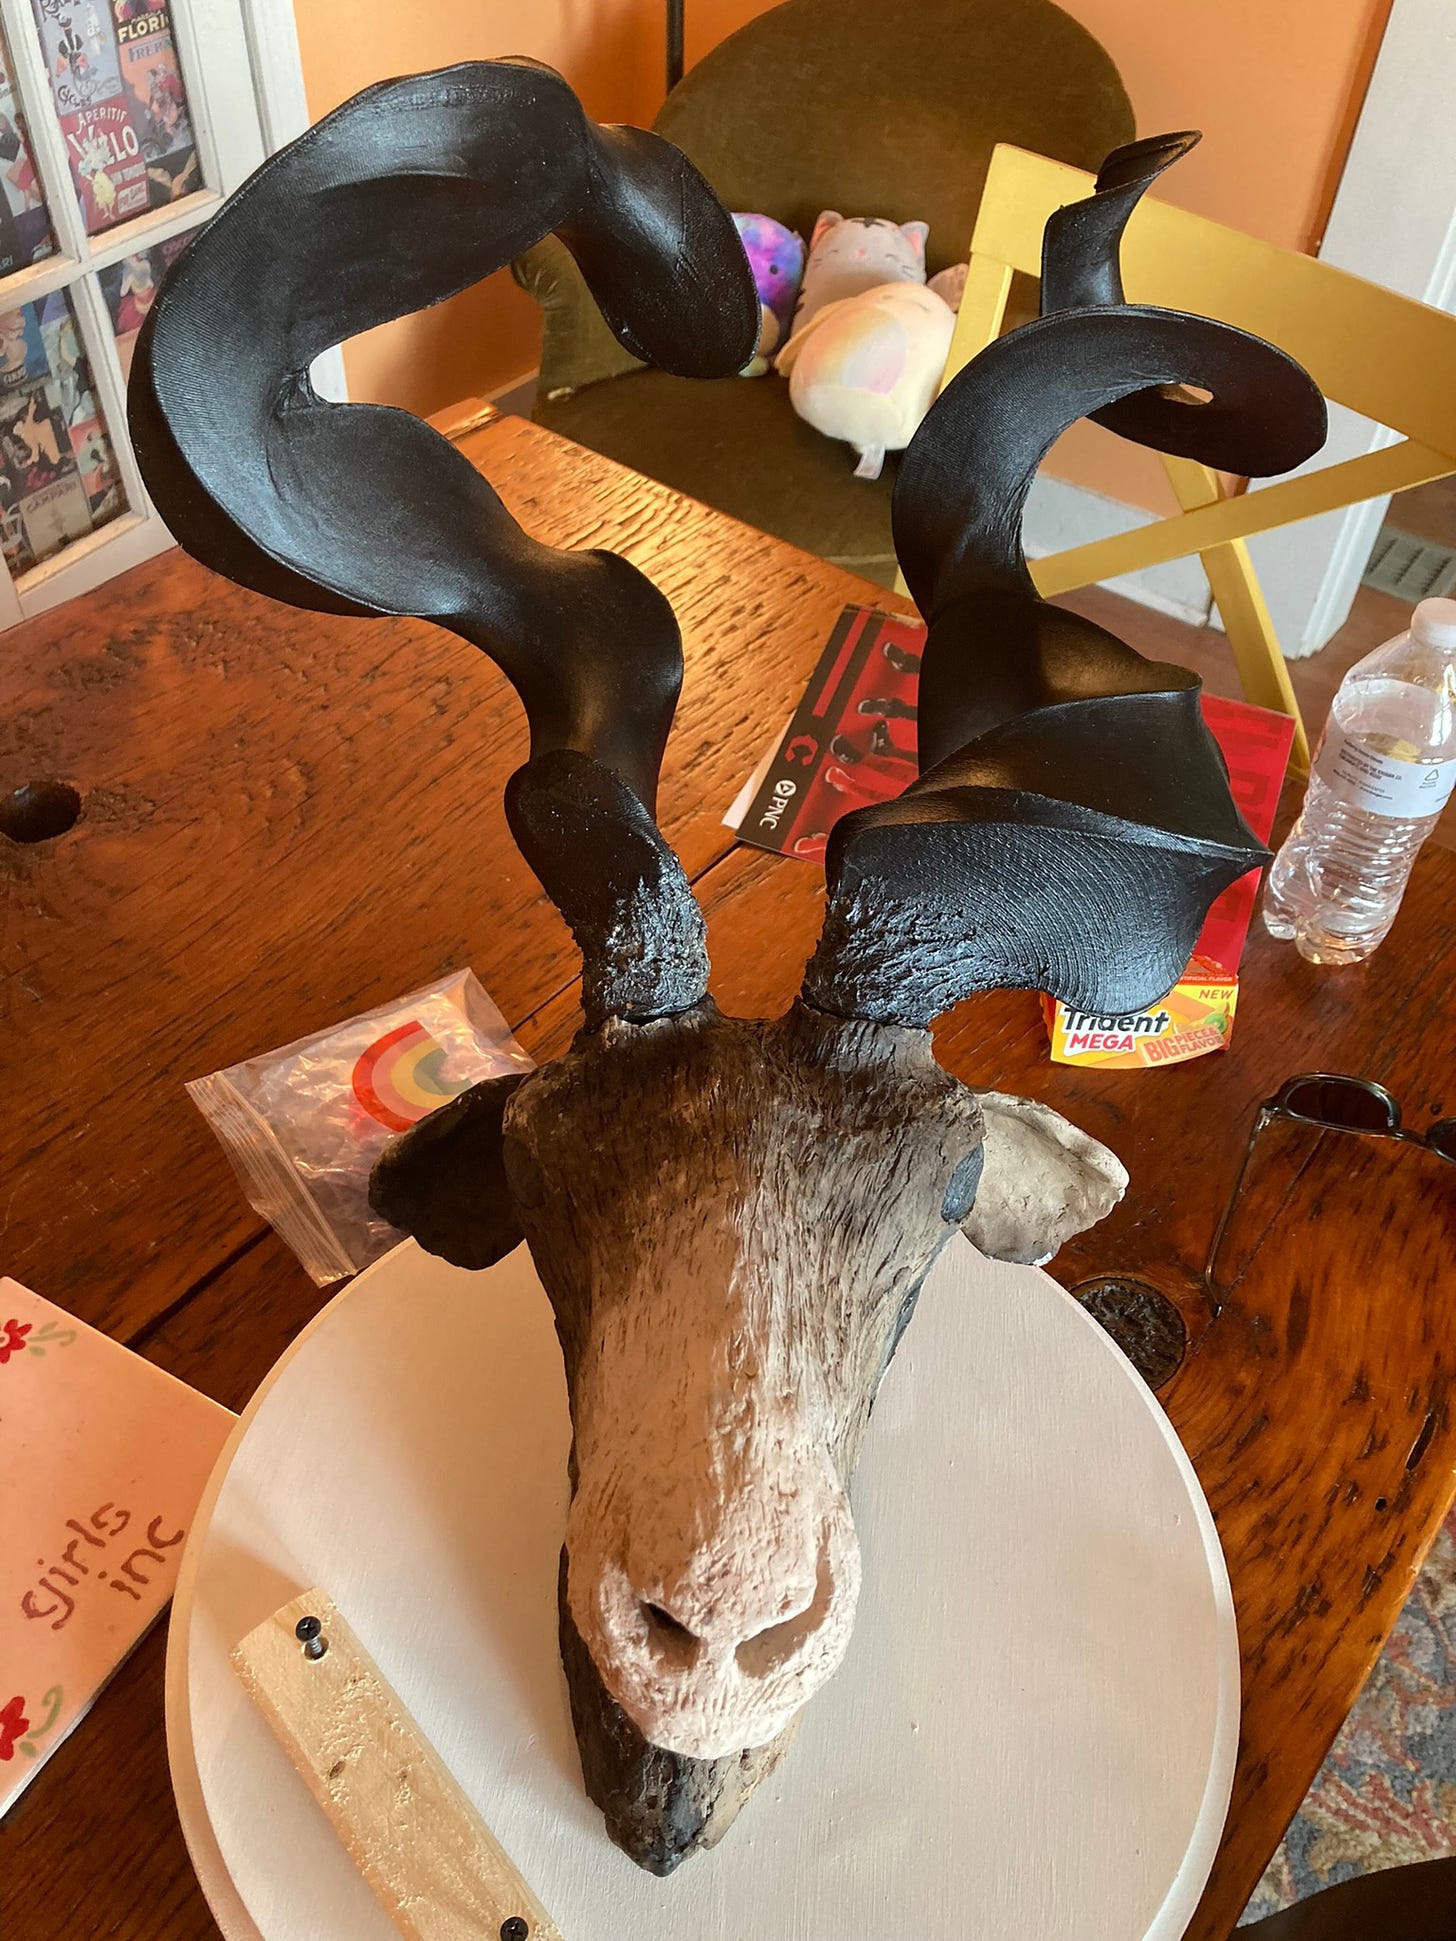 A ceramic antelope head with twisty, weird, black antlers